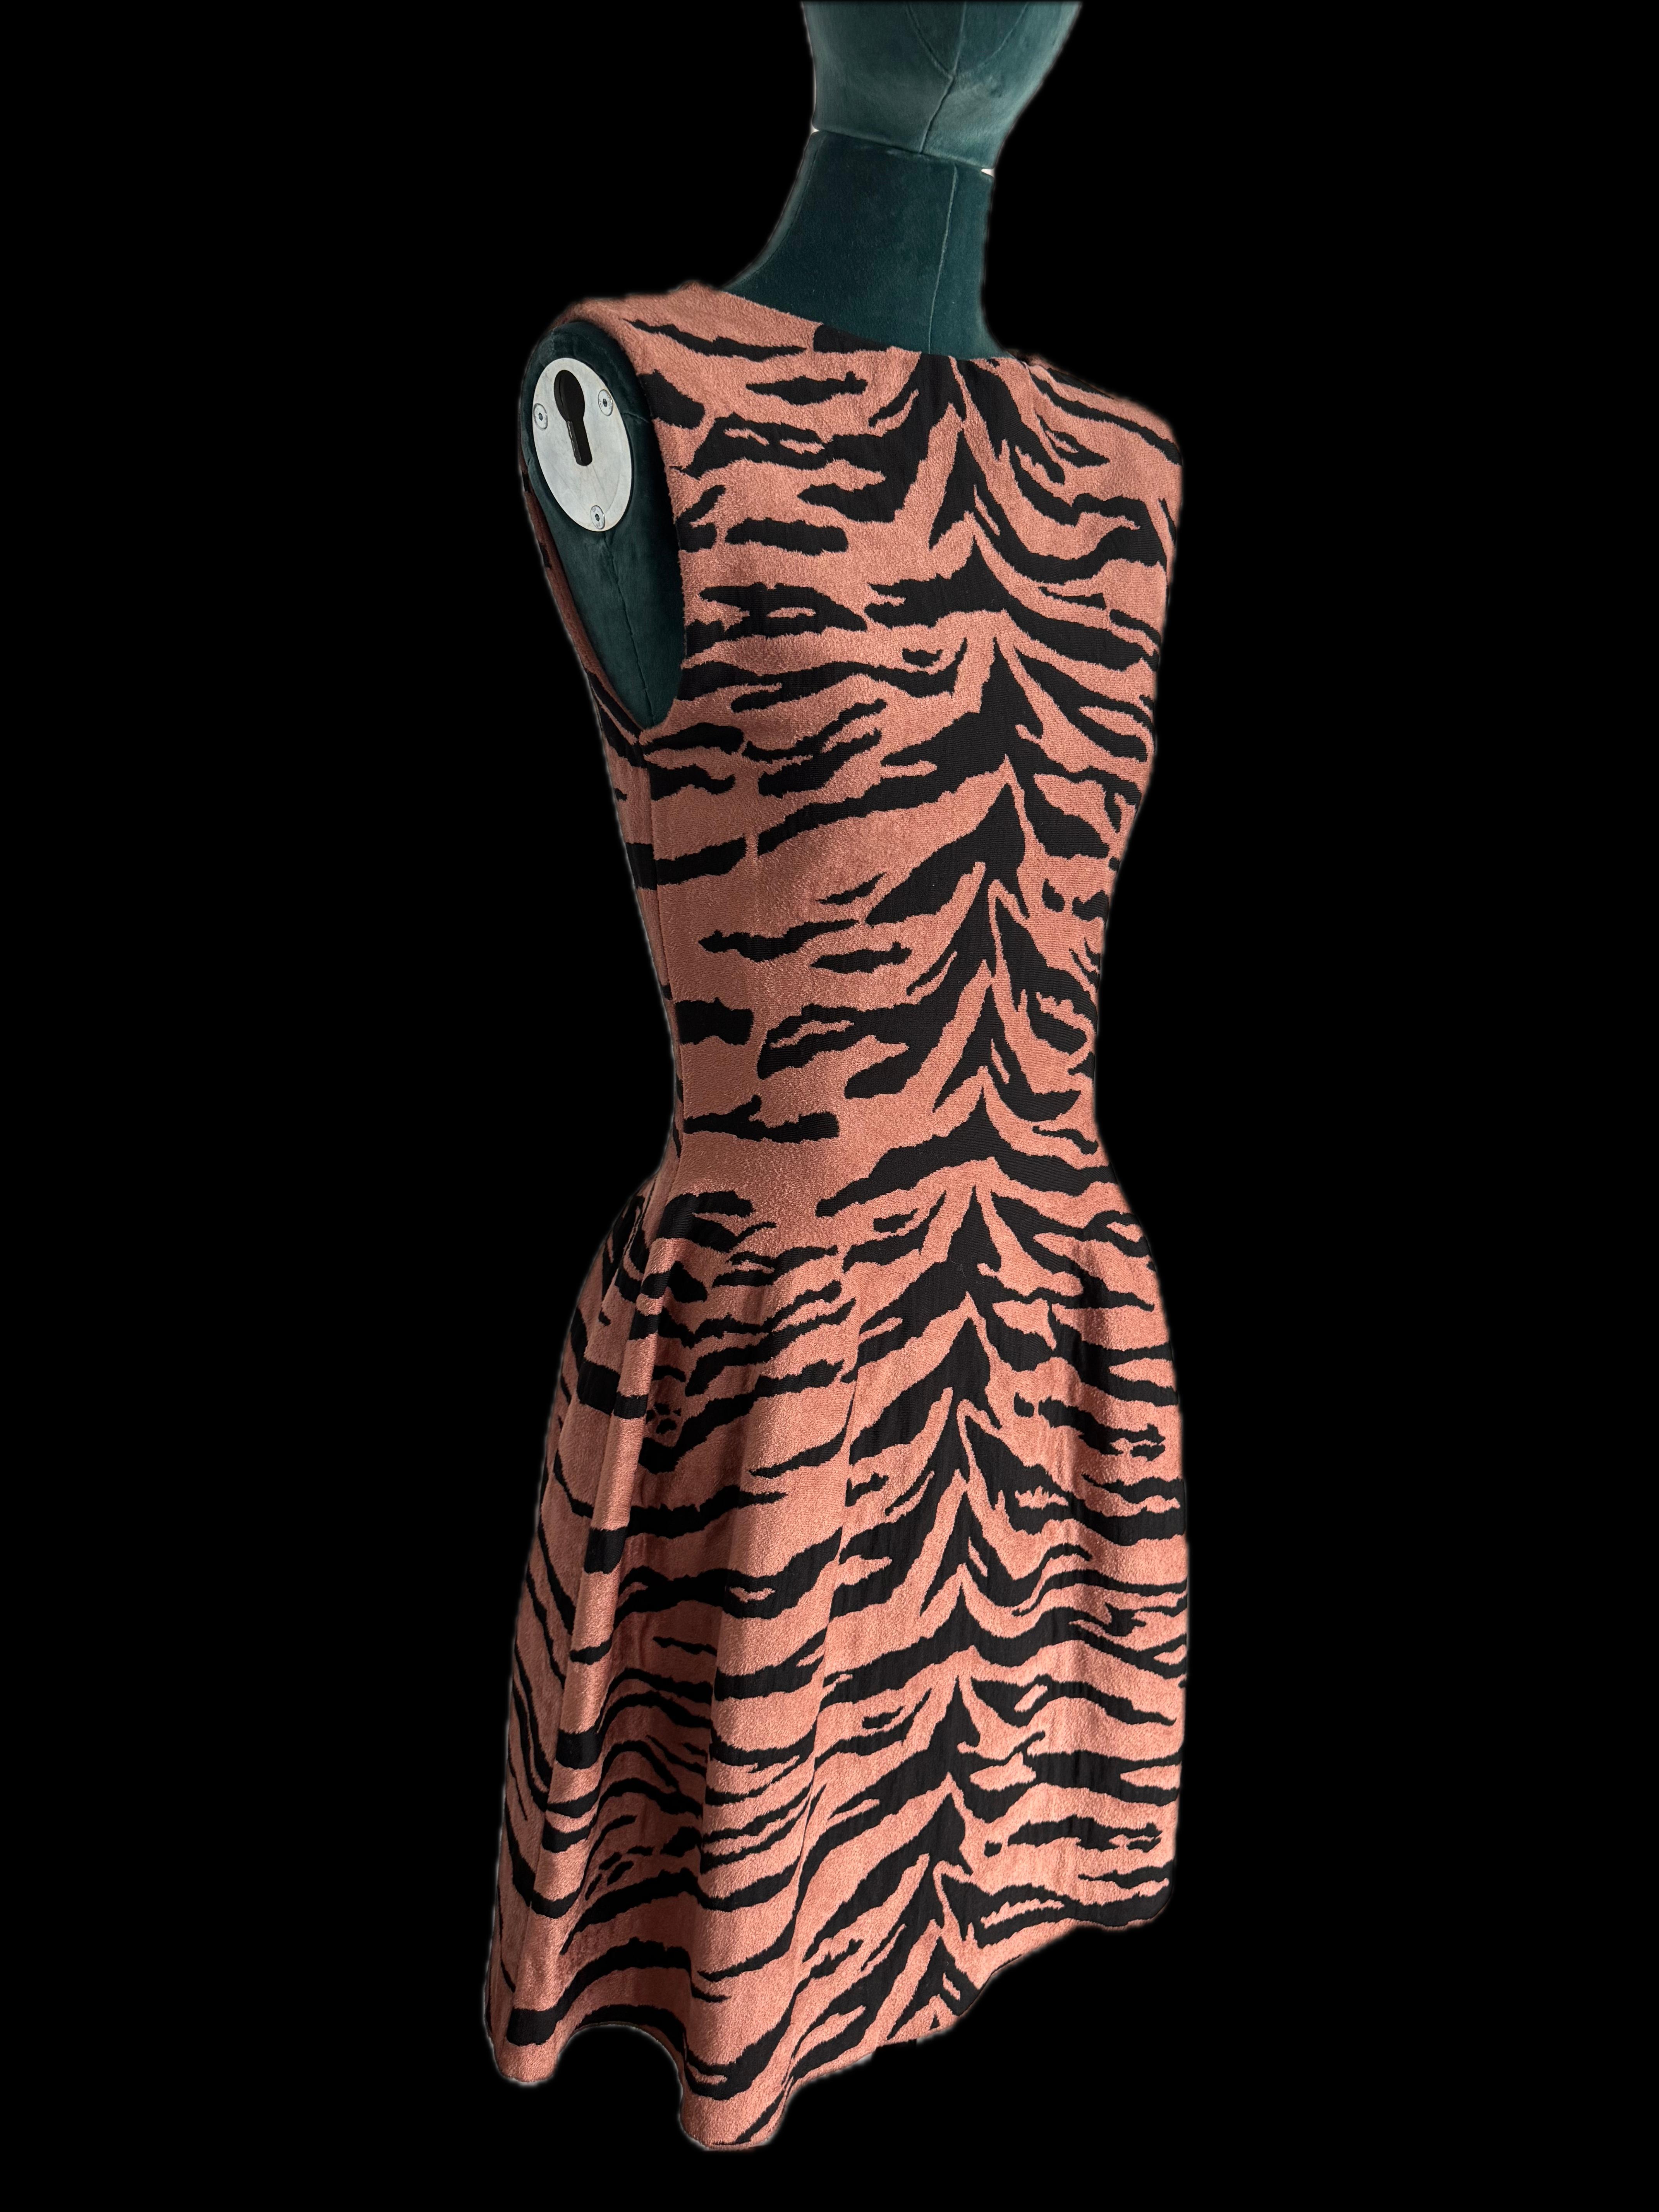 
Introducing the epitome of fierce elegance: the Alaïa Tiger Print Mini Dress. This stunning dress, in a French size 38, is brand new with tags and promises to make a bold statement with its eye-catching tiger print and impeccable